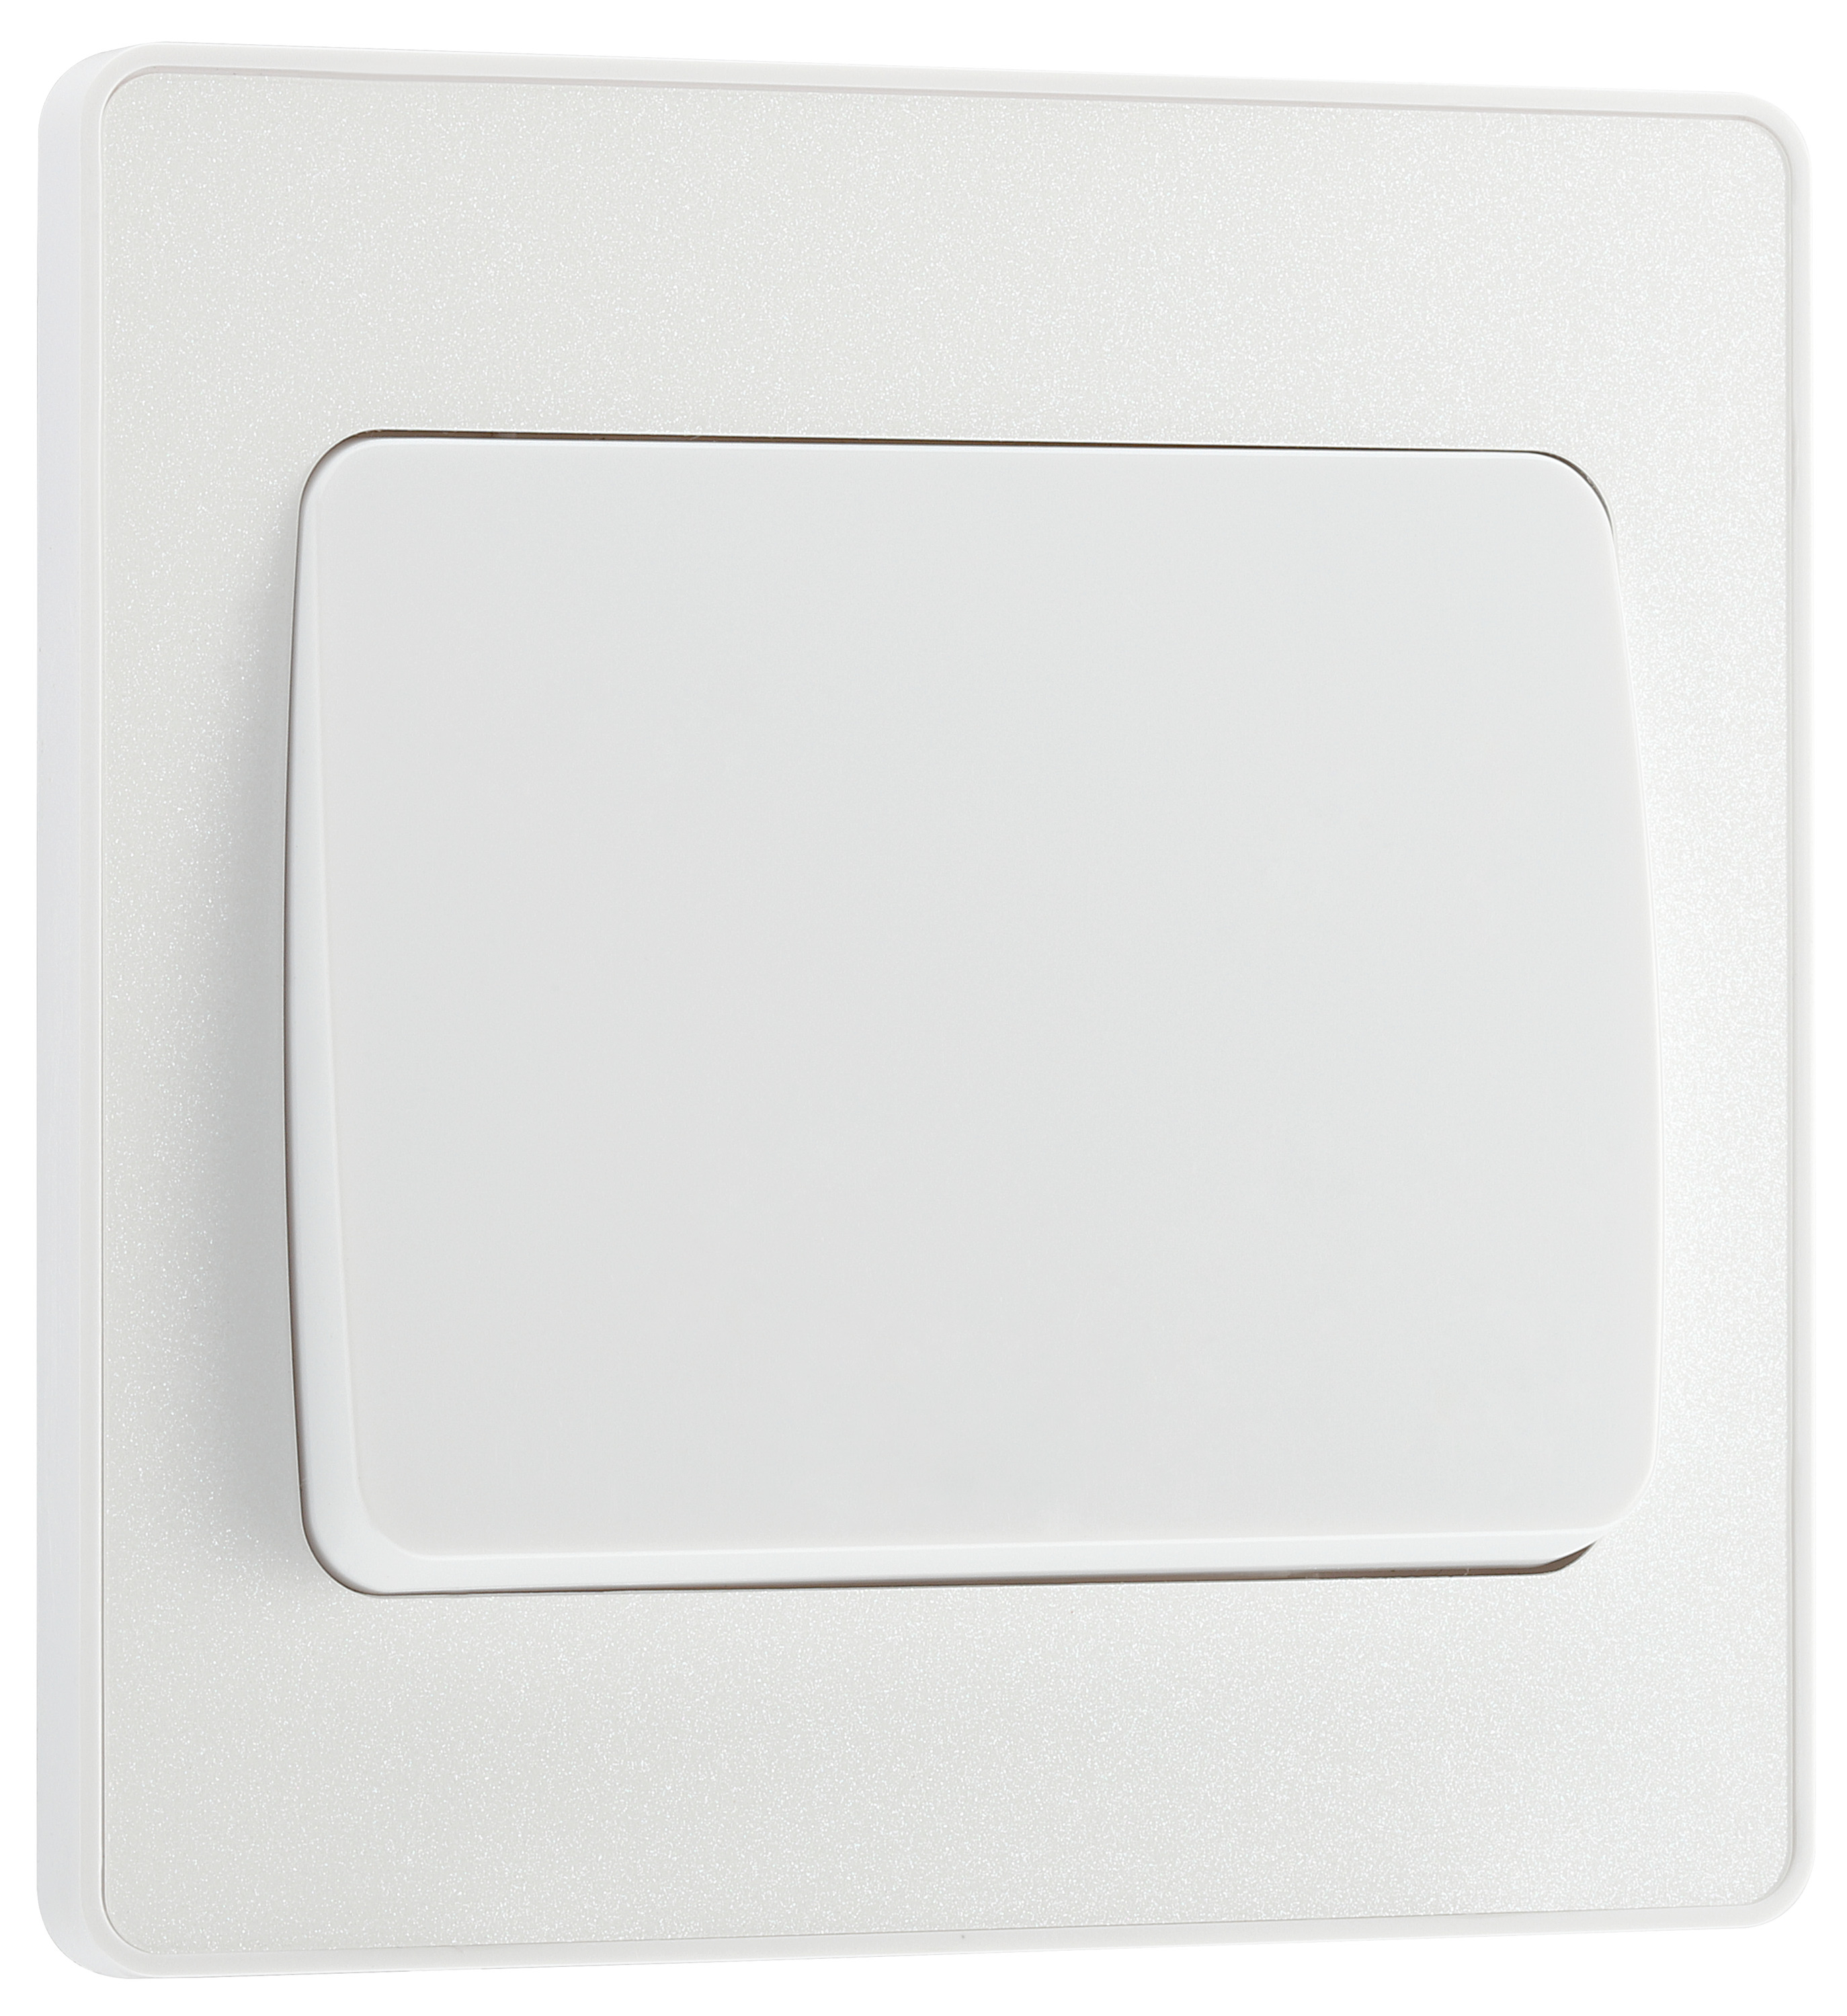 Image of BG Evolve Pearlescent White 20A 16Ax Wide Rocker Single Light Switch - 2 Way